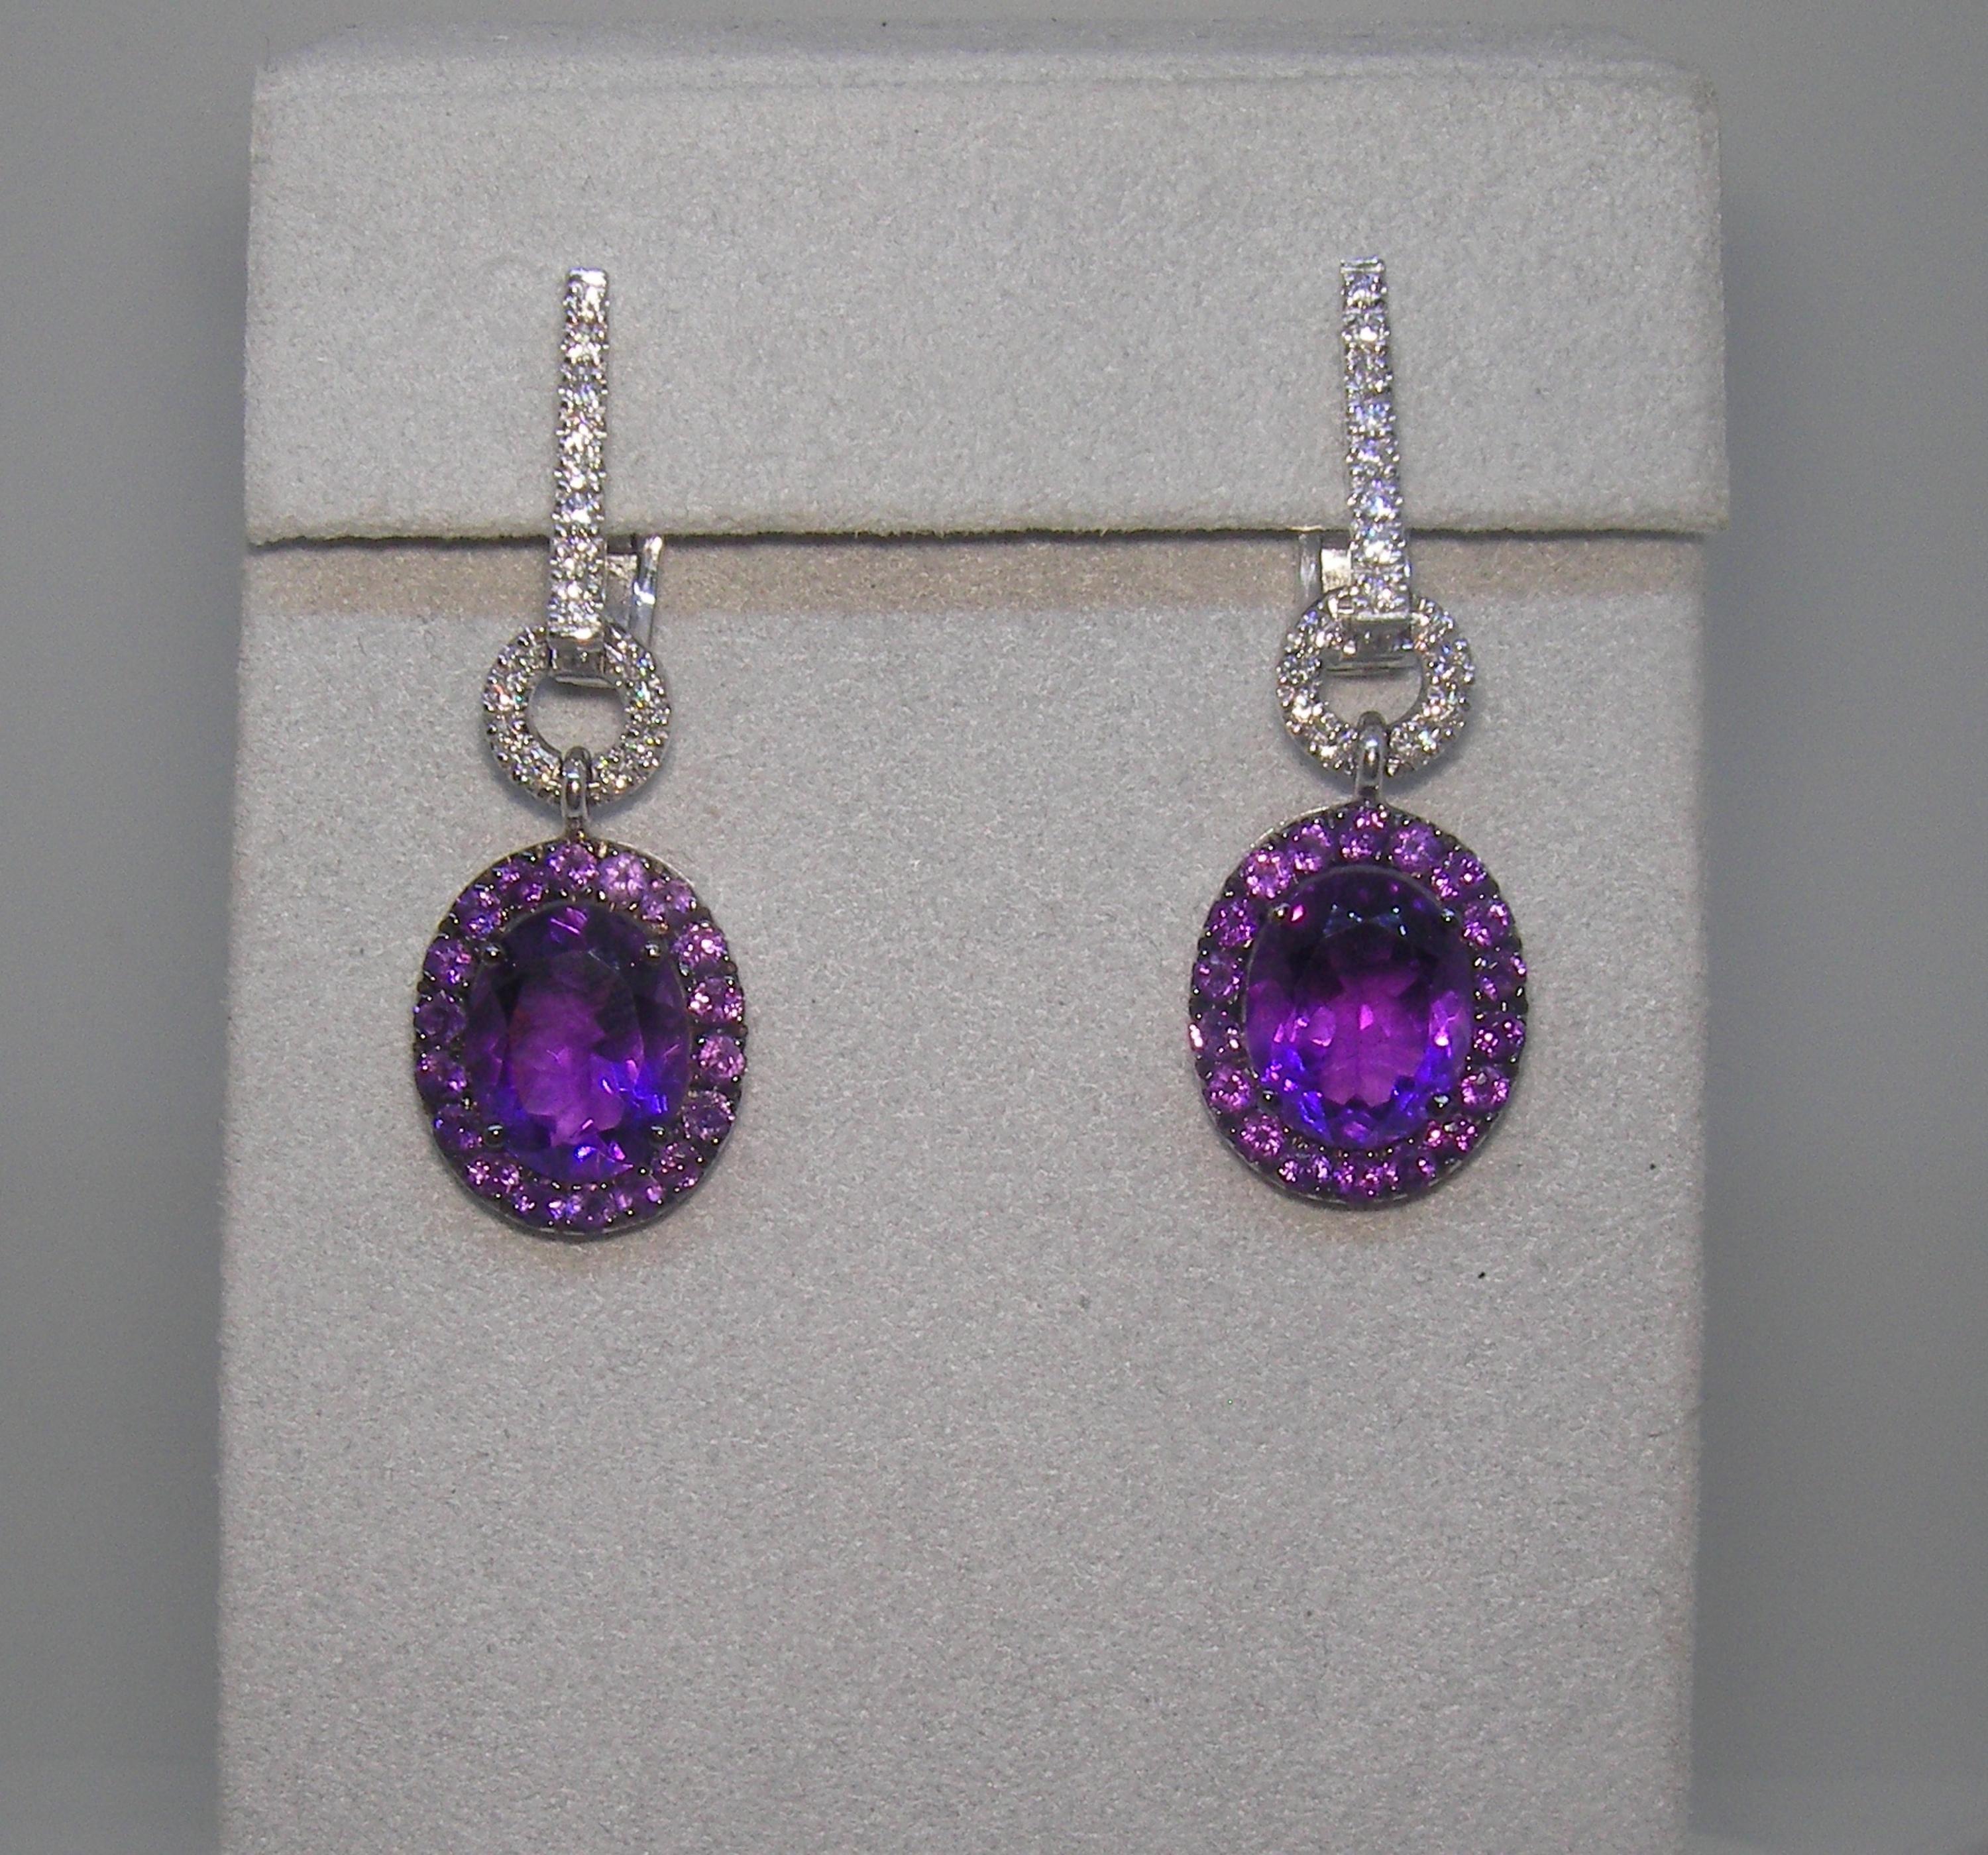 18 Karat White Gold Diamond and Amethyst Dangel Earrings
32 Diamonds 0,38  Carat
2 Amethyst  16,55 Carat
36 Amethyst 1,26 Carat

Founded in 1974, Gianni Lazzaro is a family-owned jewelery company based out of Düsseldorf, Germany.
Although rooted in